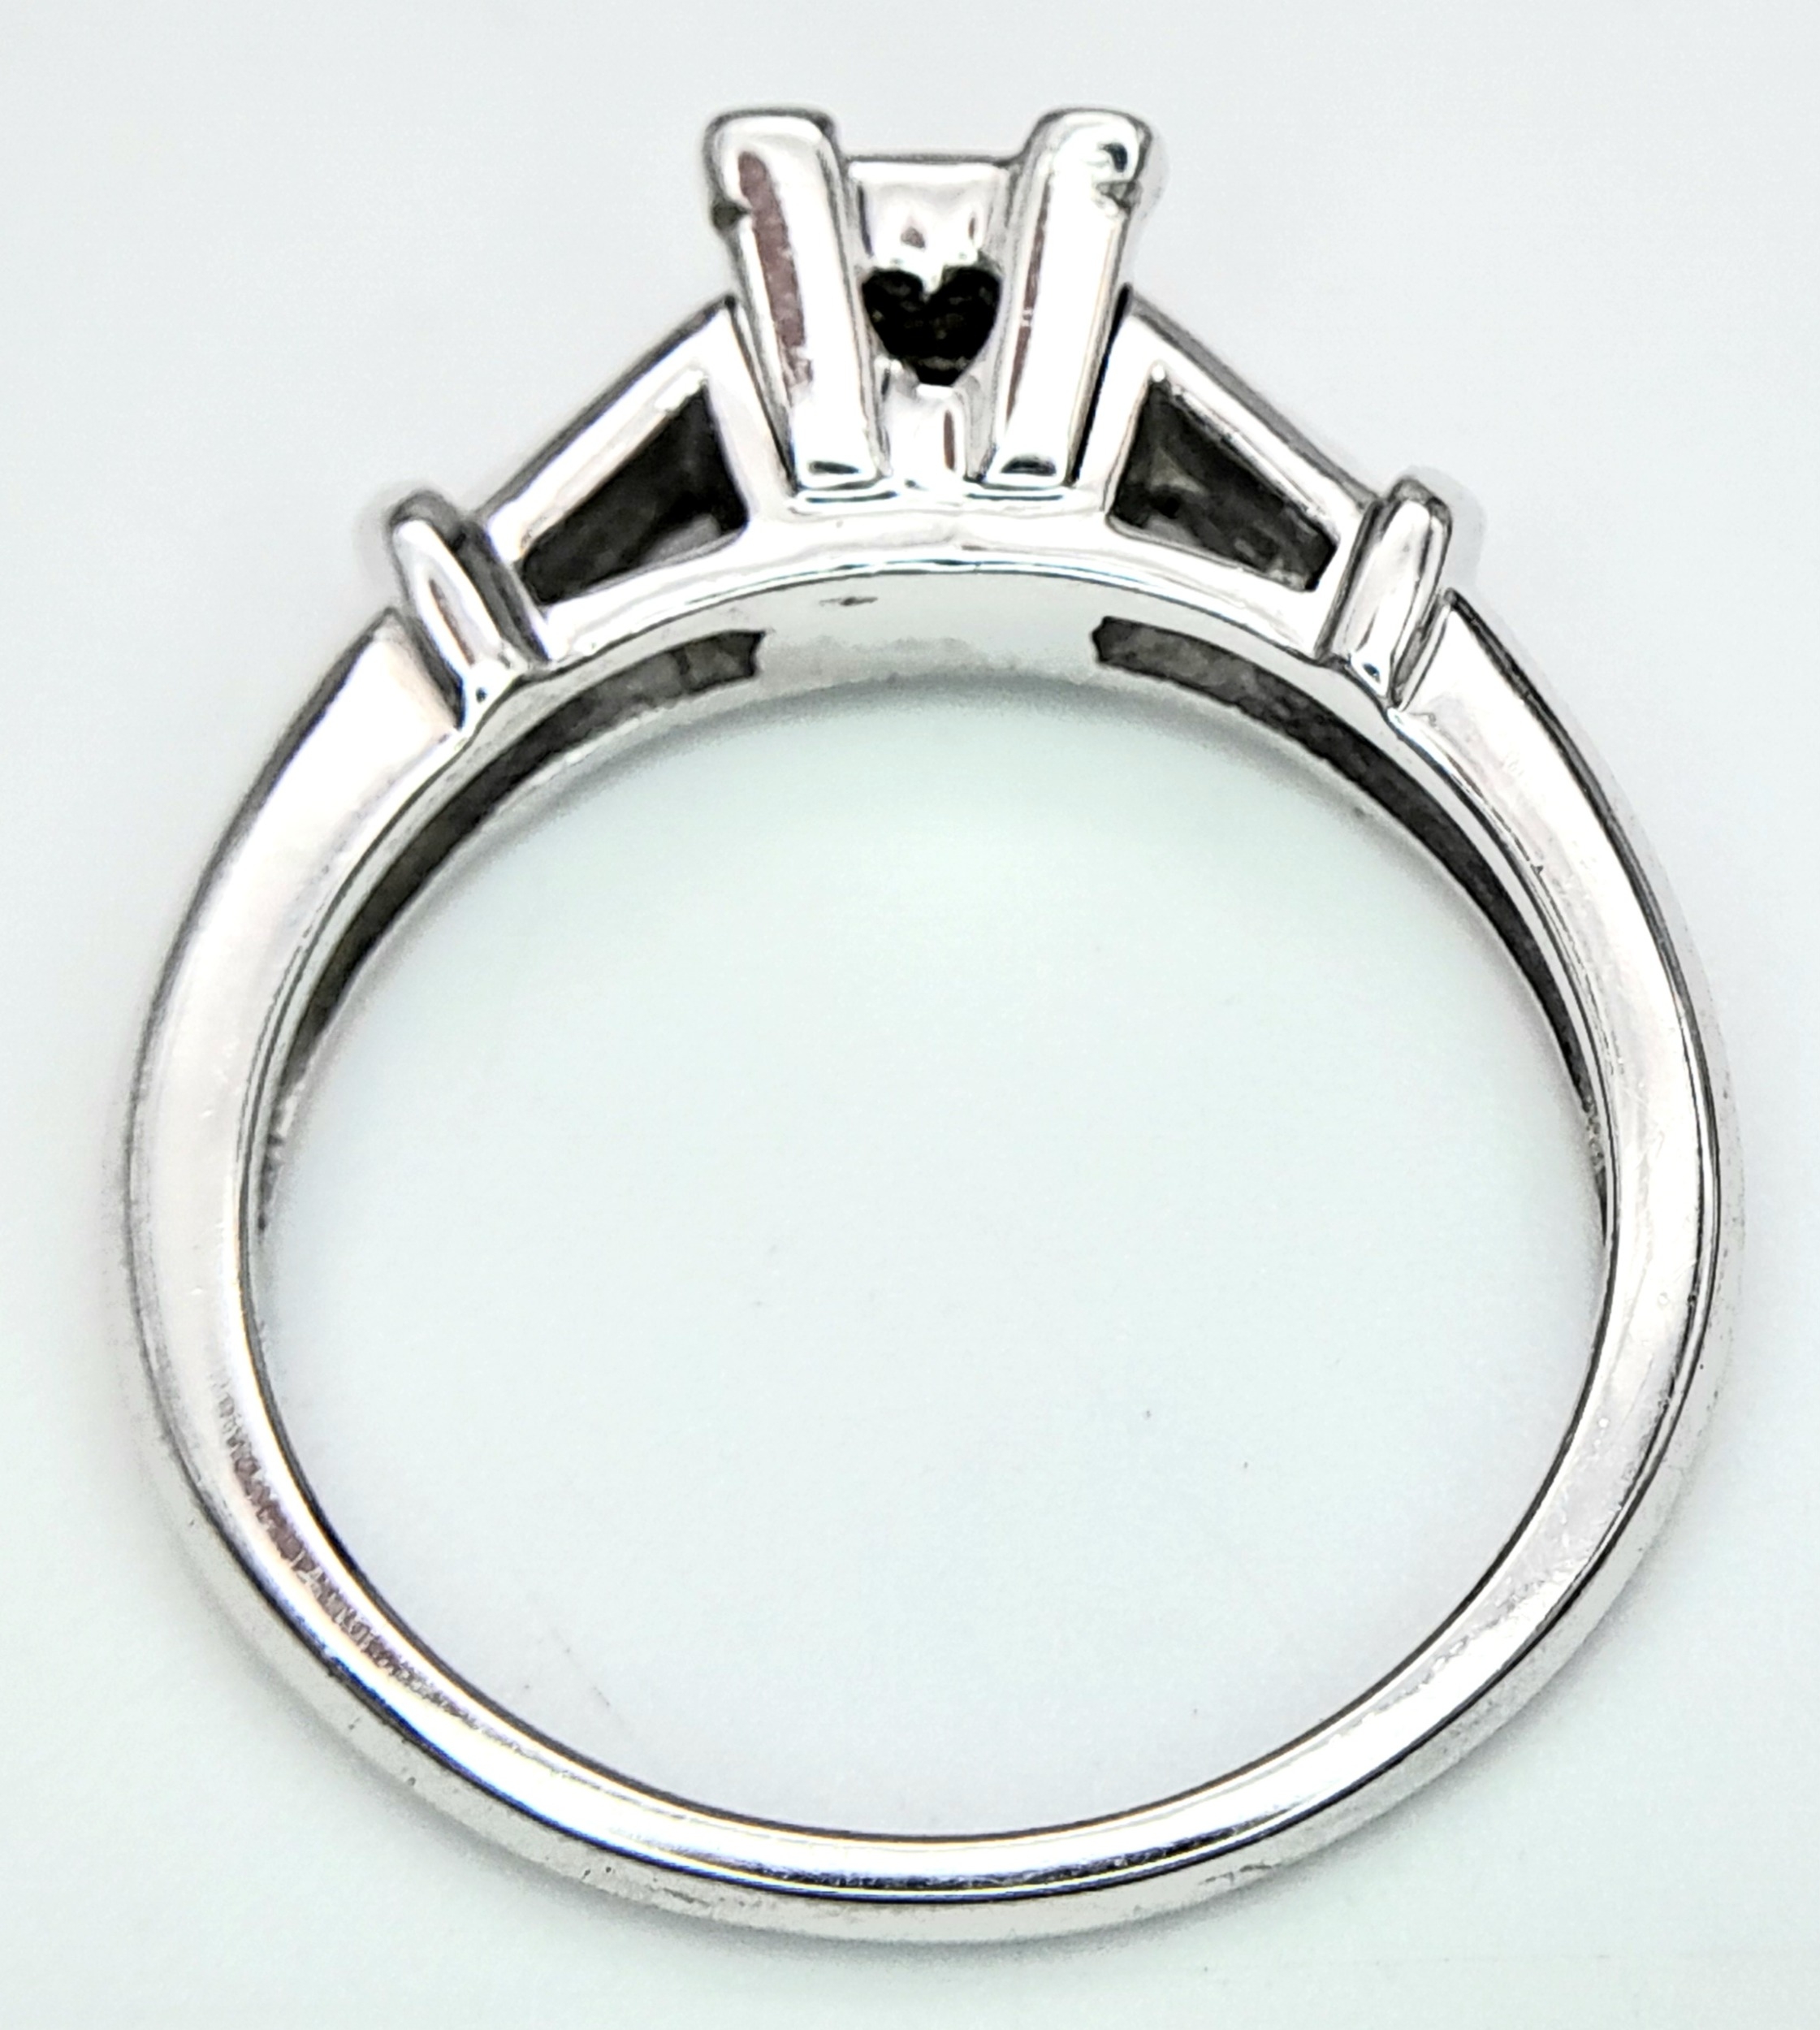 AN 18K WHITE GOLD DIAMOND RING. 0.25ctw, Size M, 5.1g total weight. Ref: SC 8067 - Image 5 of 6